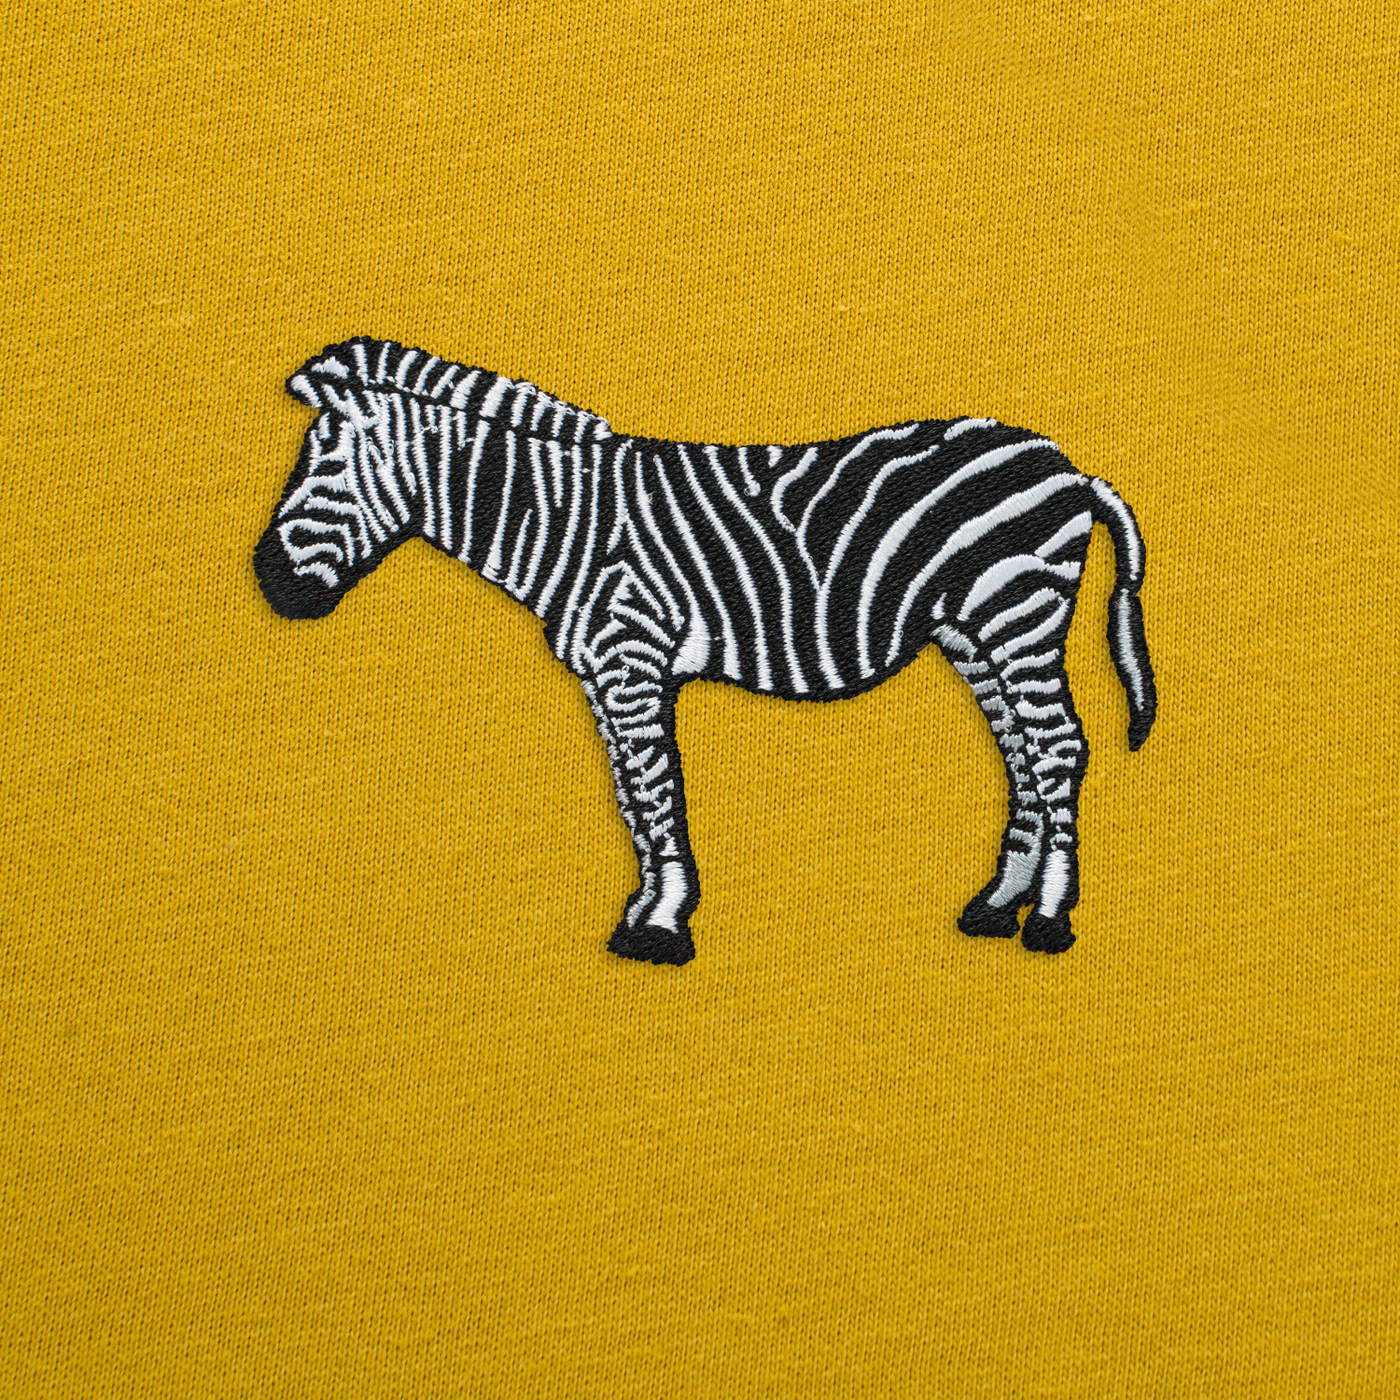 Bobby's Planet Women's Embroidered Zebra T-Shirt from African Animals Collection in Mustard Color#color_mustard